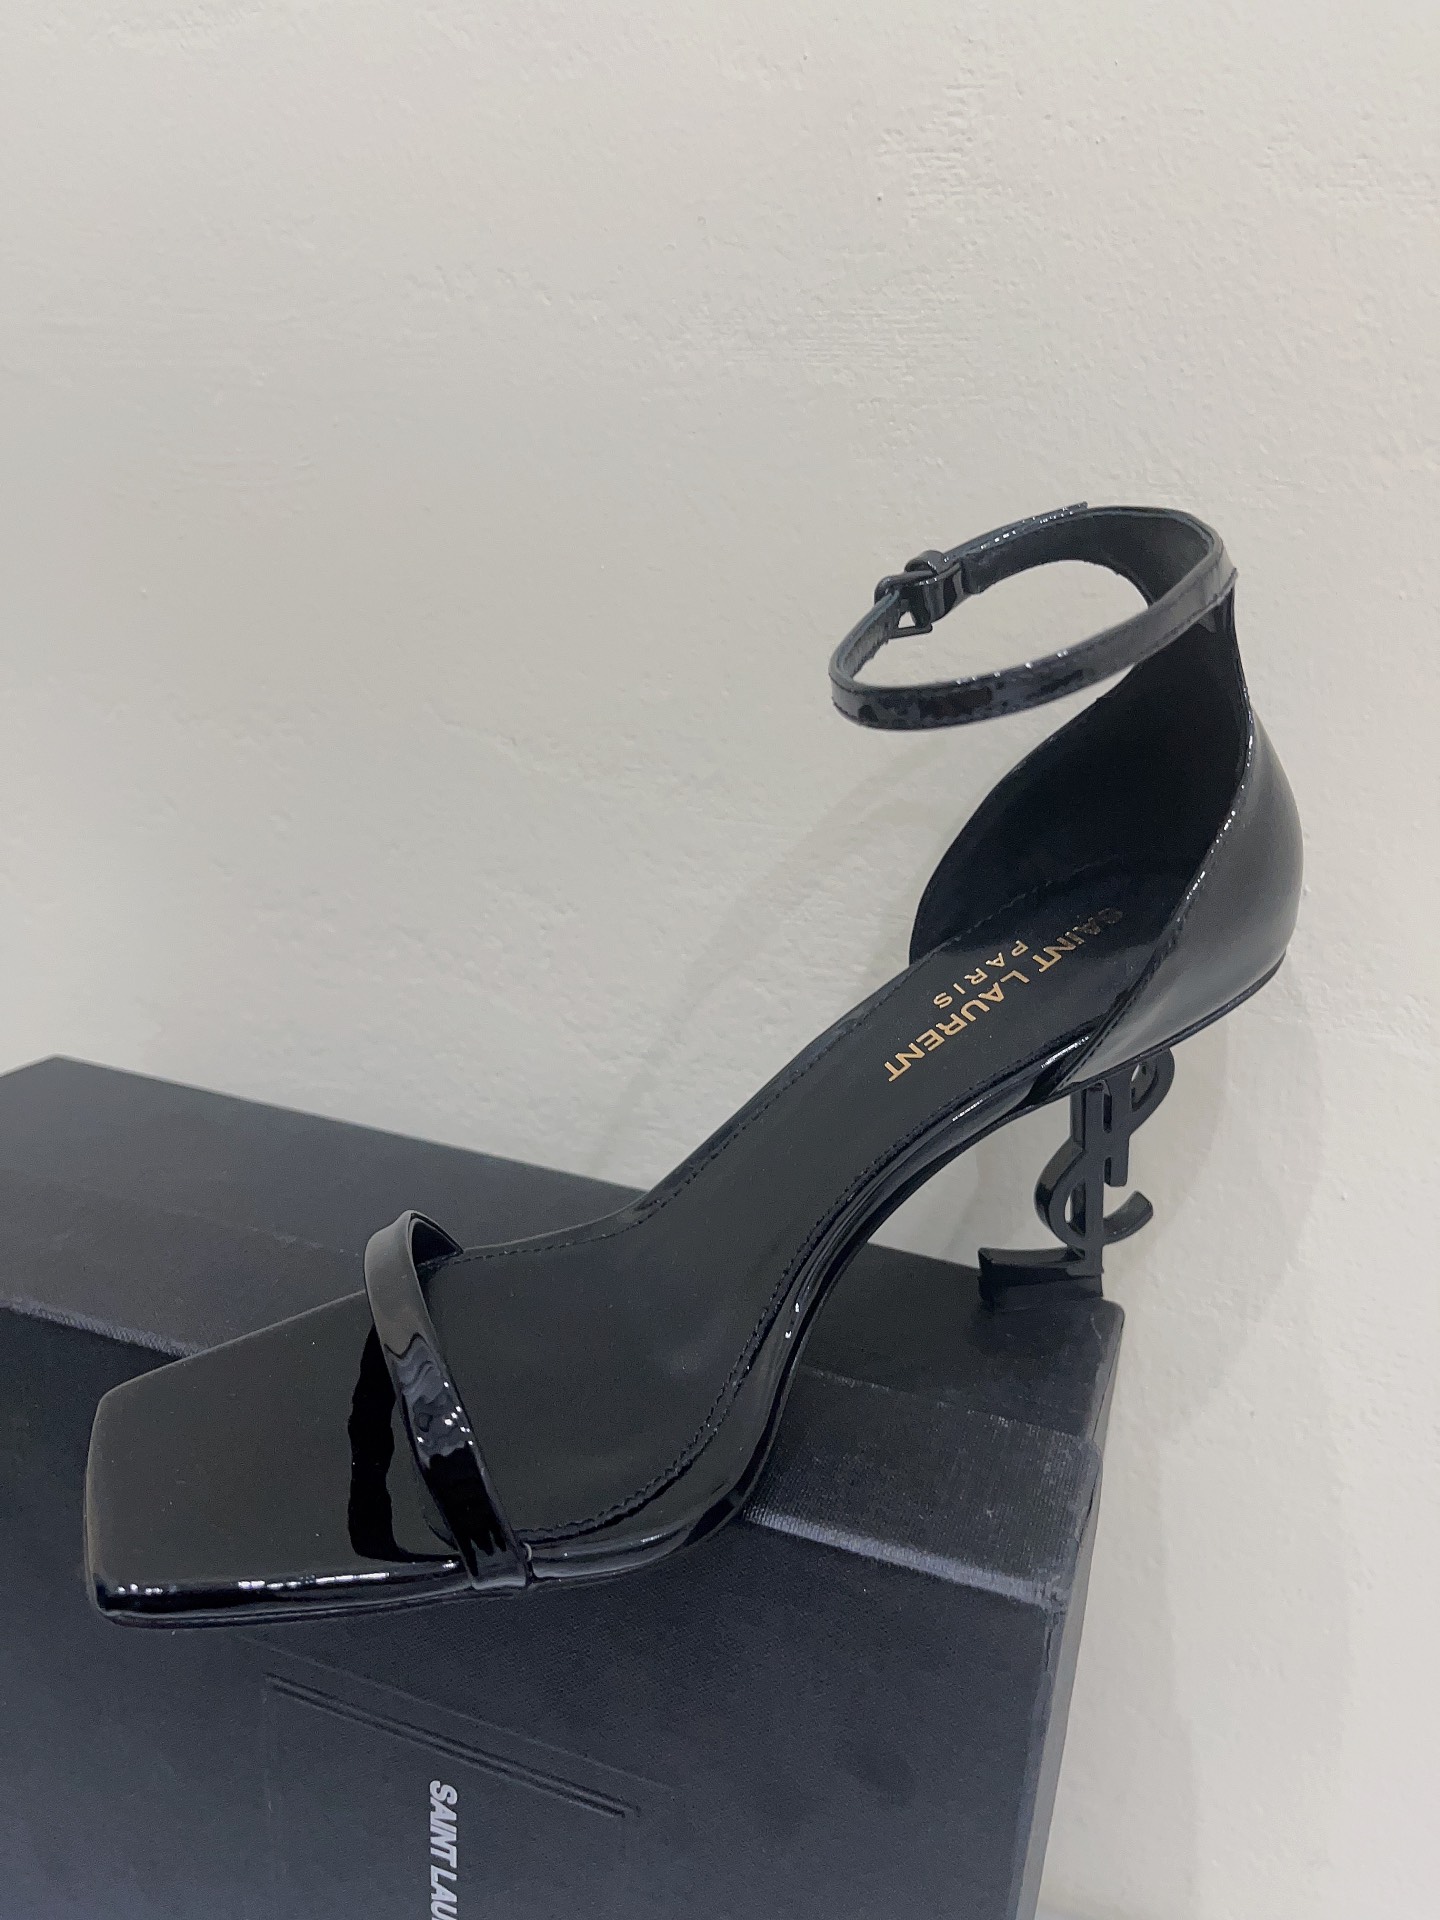 The Online Shopping
 Yves Saint Laurent Online
 Shoes High Heel Pumps Sandals Rose Genuine Leather Patent Fall/Winter Collection